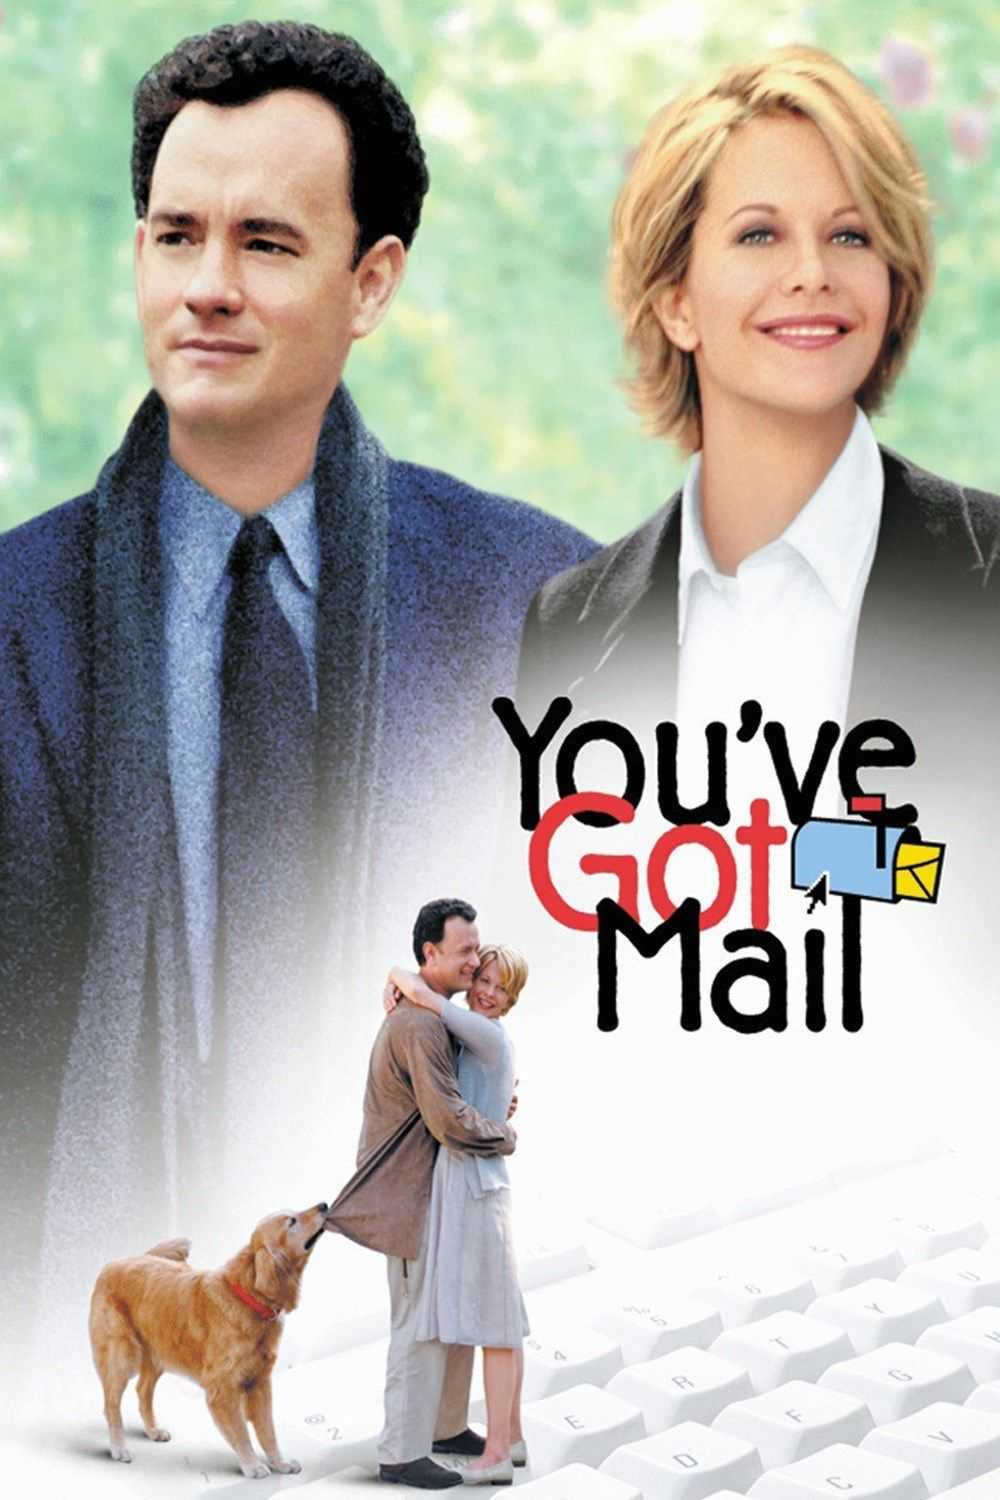 You have got mail 1998